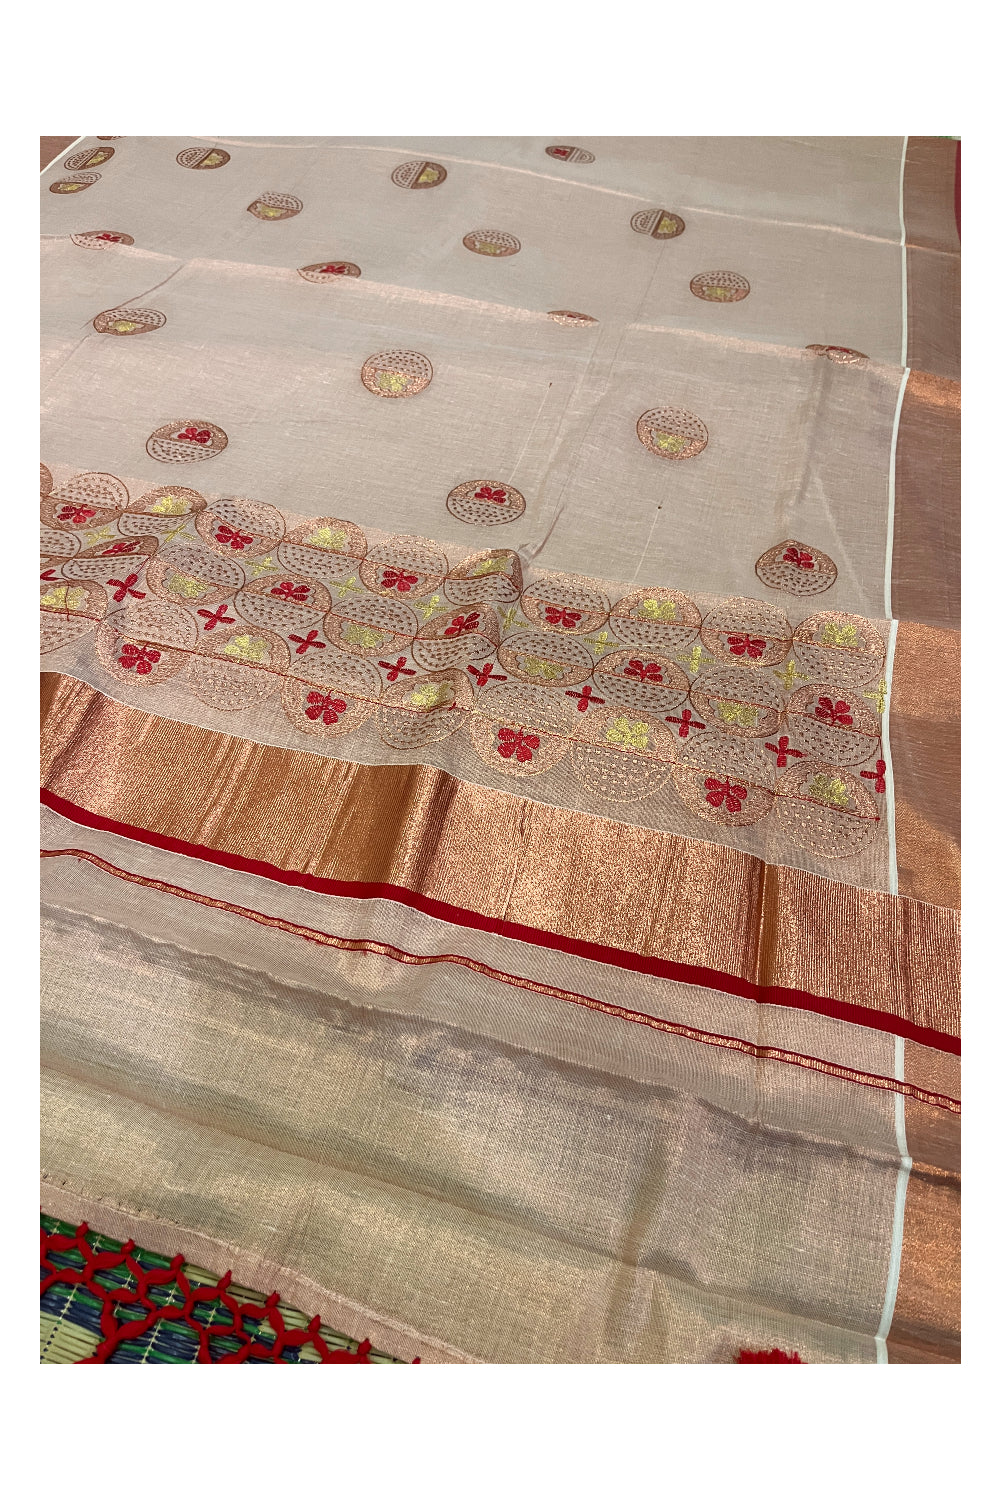 Southloom Copper Tissue Kasavu Saree with Embroidery Design and Red Tassels Works on Pallu